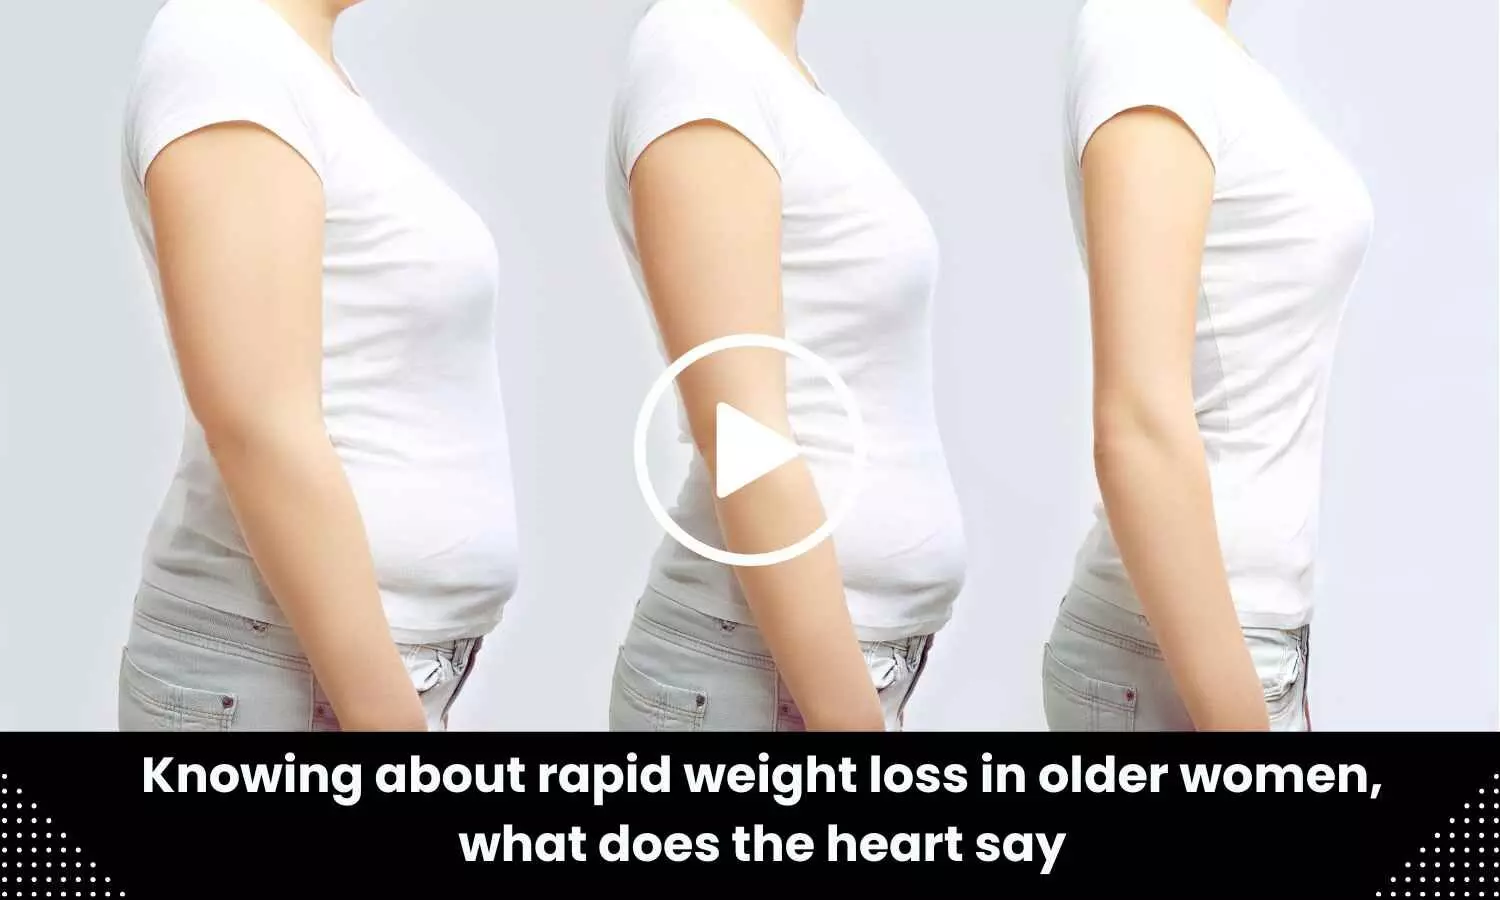 Knowing about rapid weight loss in older women, what does the heart say